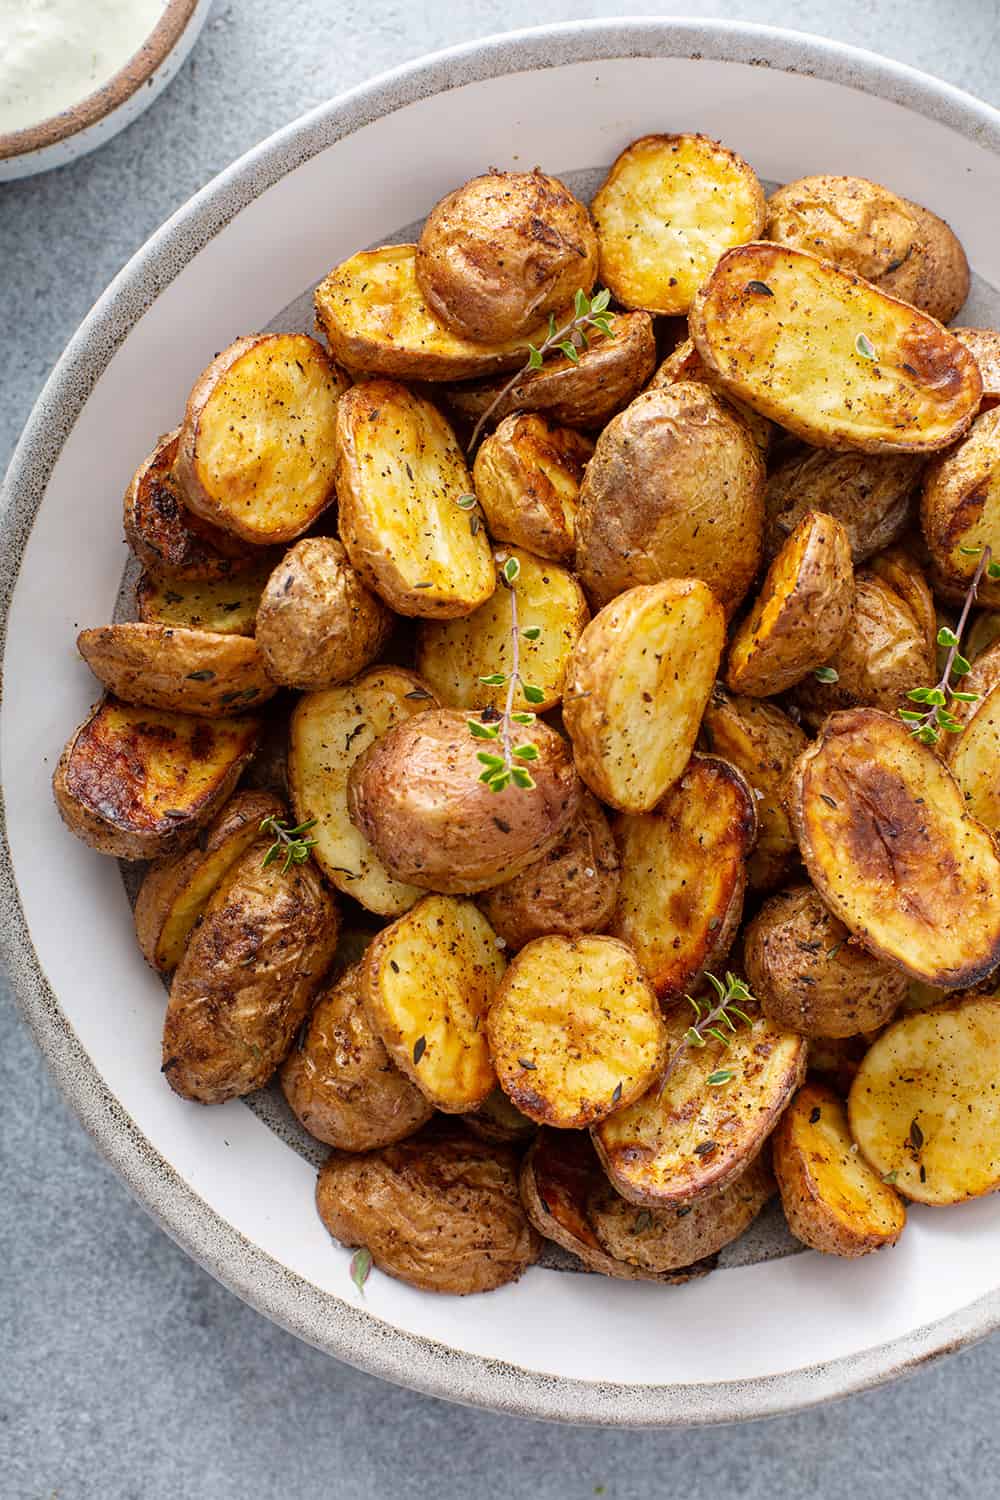 møl Sidst royalty Air Fryer Roasted Potatoes - My Baking Addiction